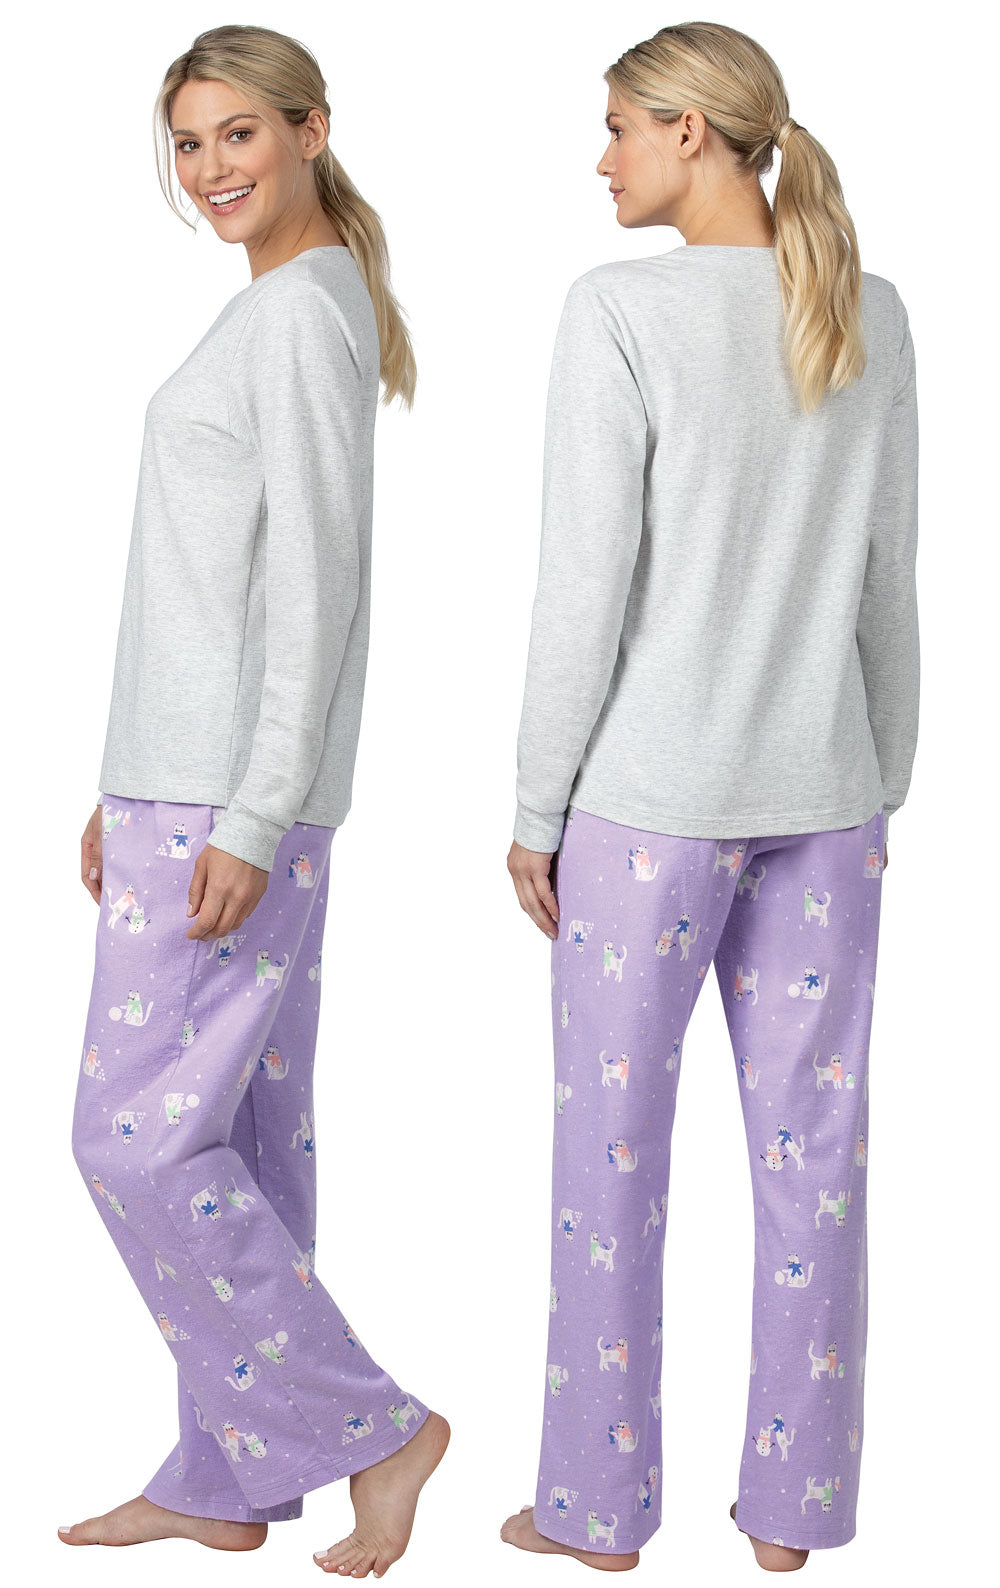 Purrfect Flannel Pajamas